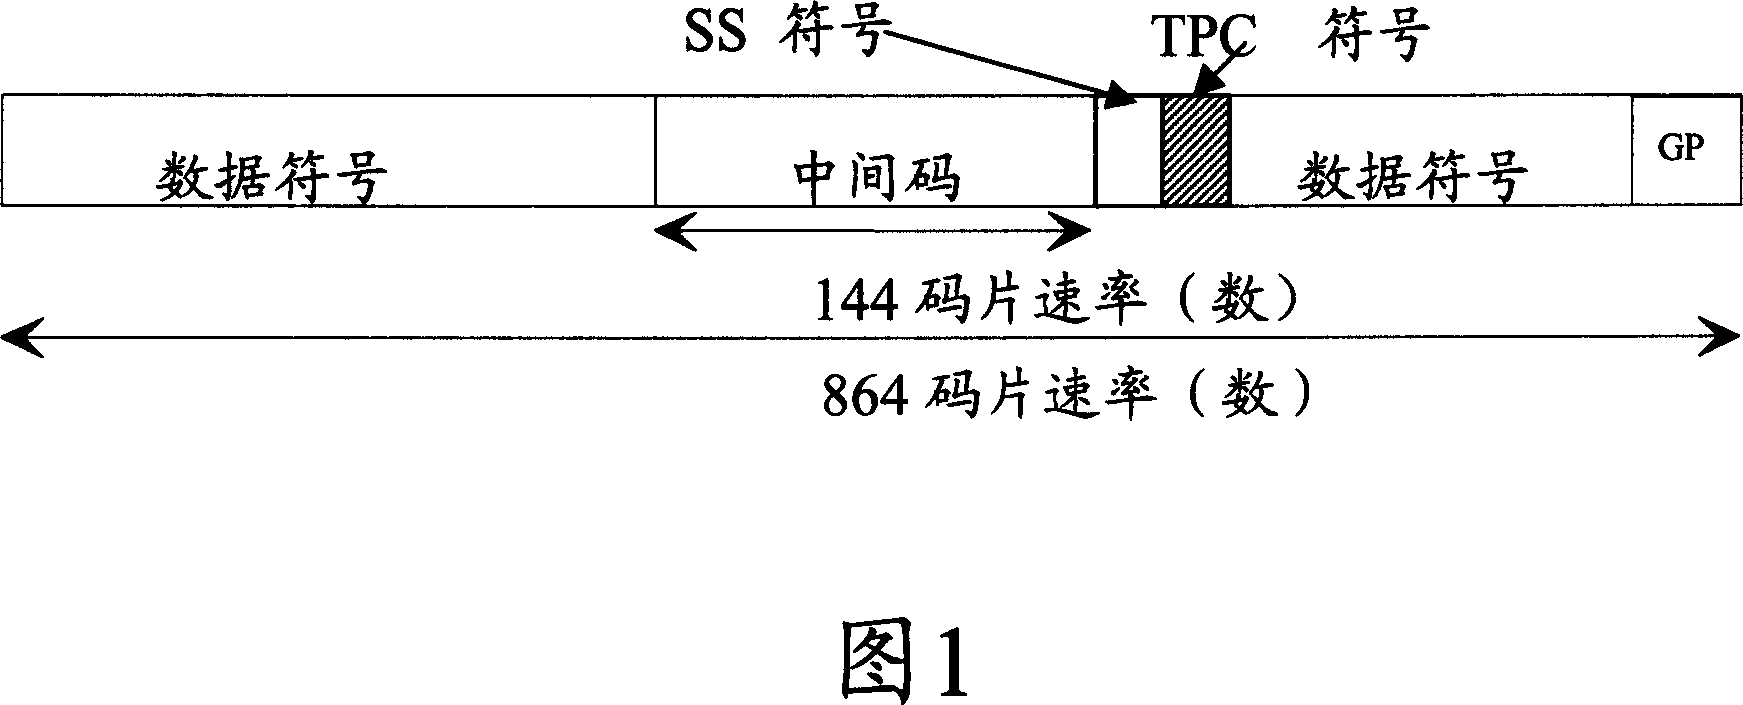 Method for configuring node B high-speed sharing information channel power control parameter